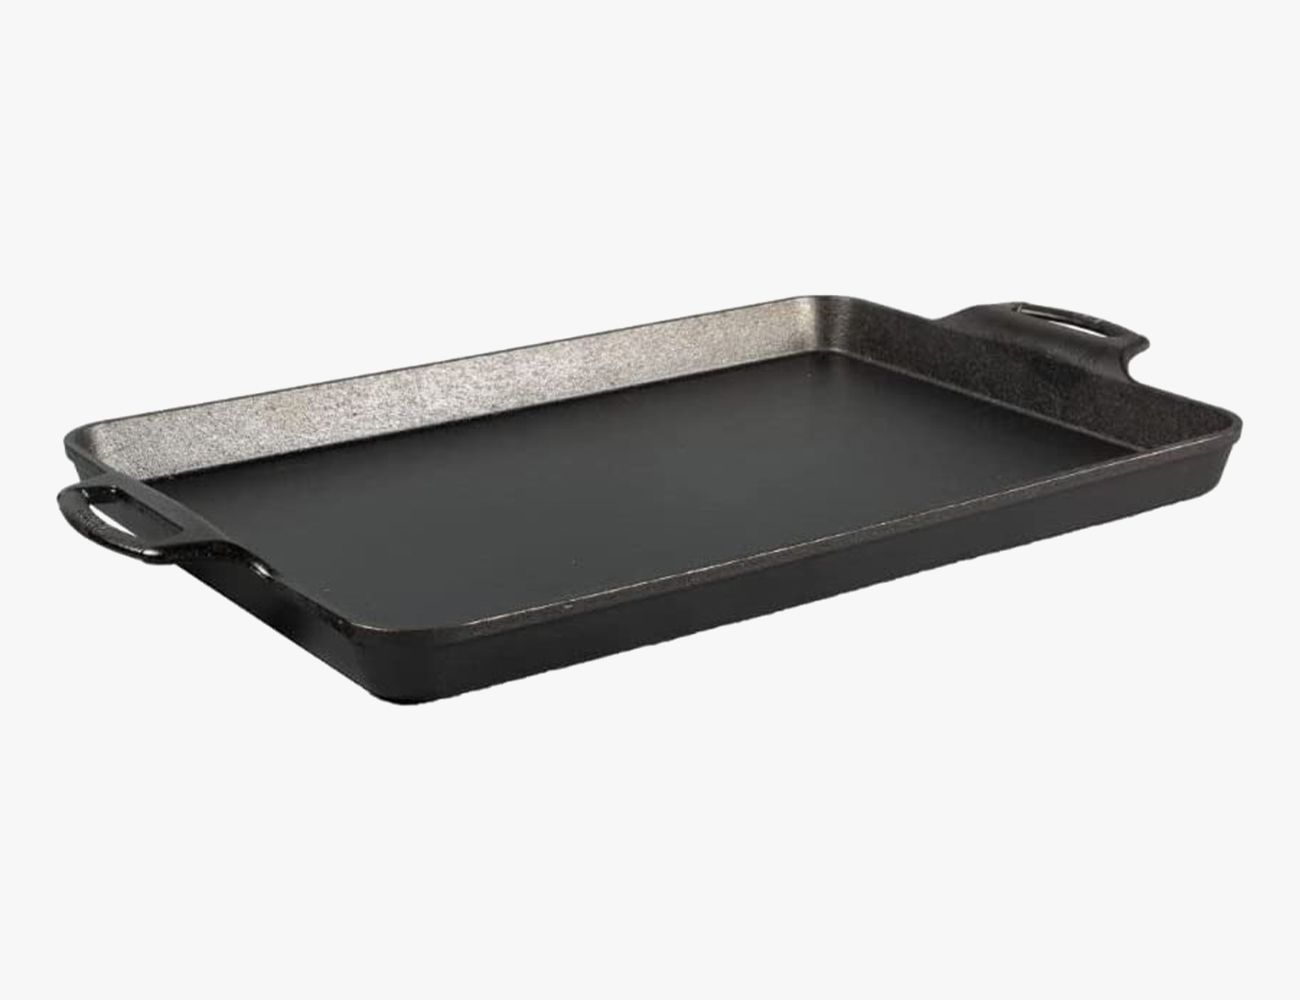 Lodge Bakeware: Explore the new pans and reimagined favorites